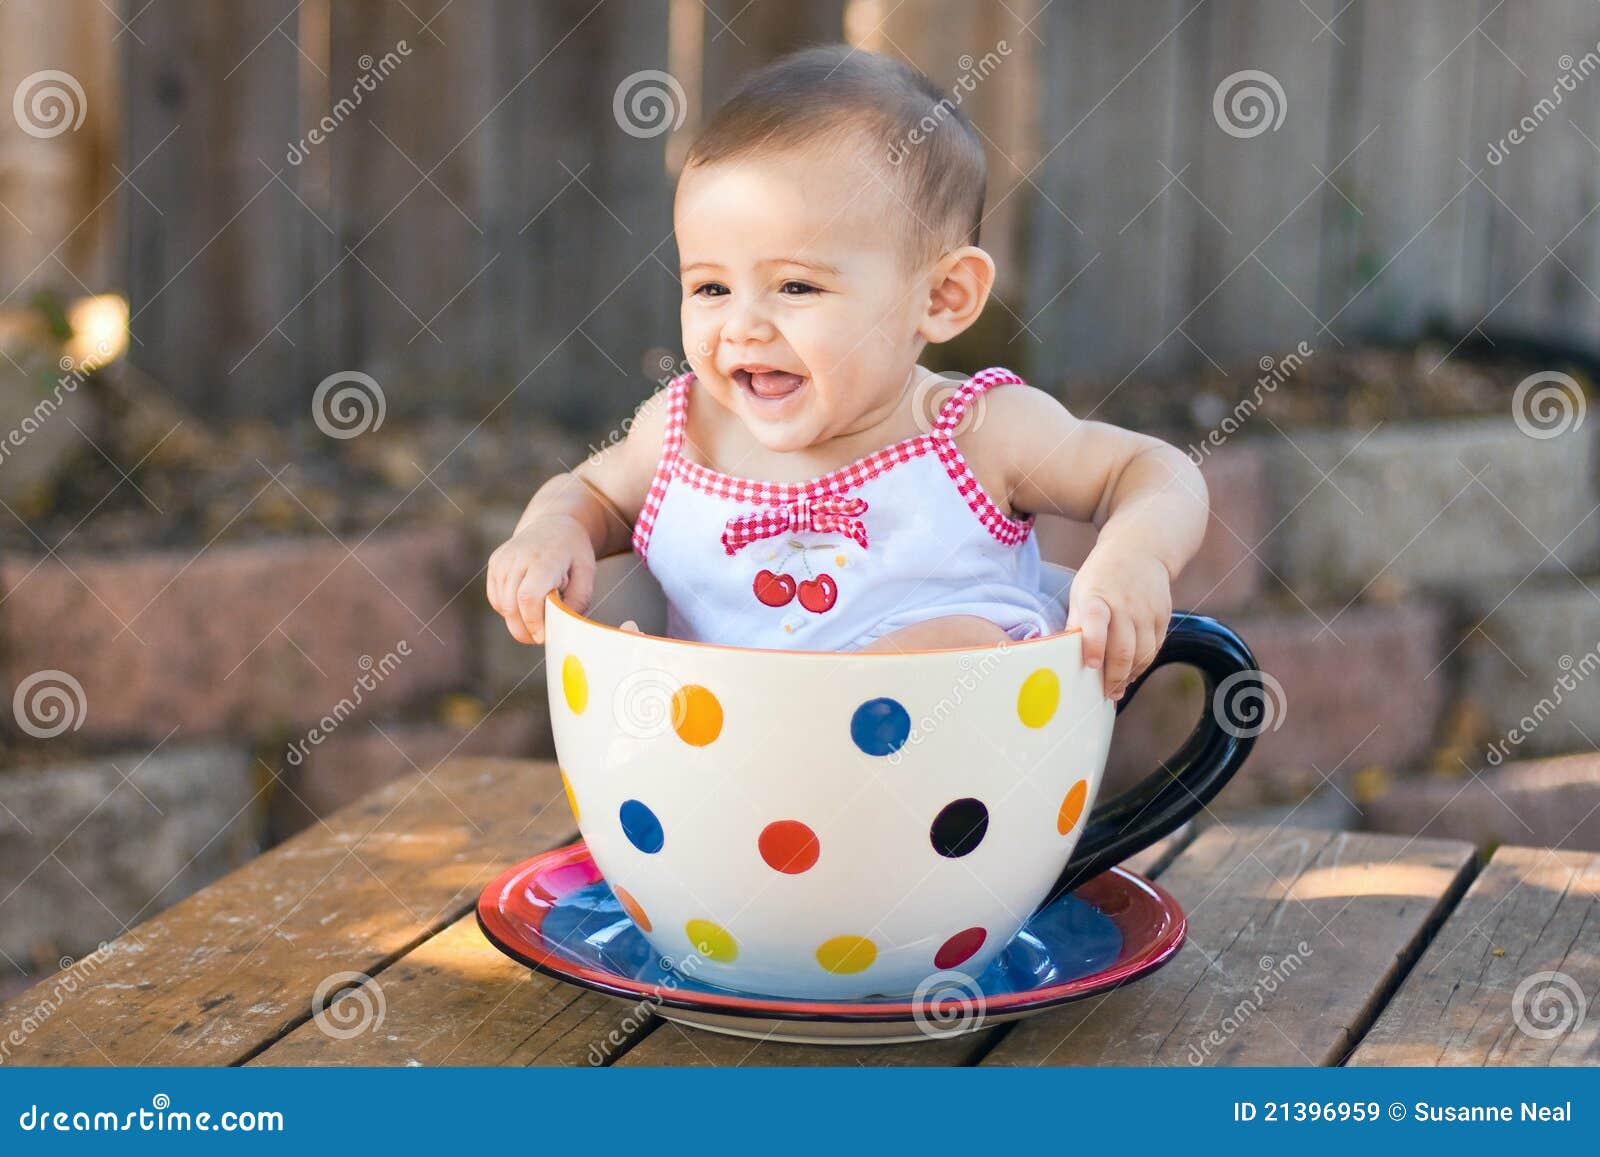 baby girl in giant teacup